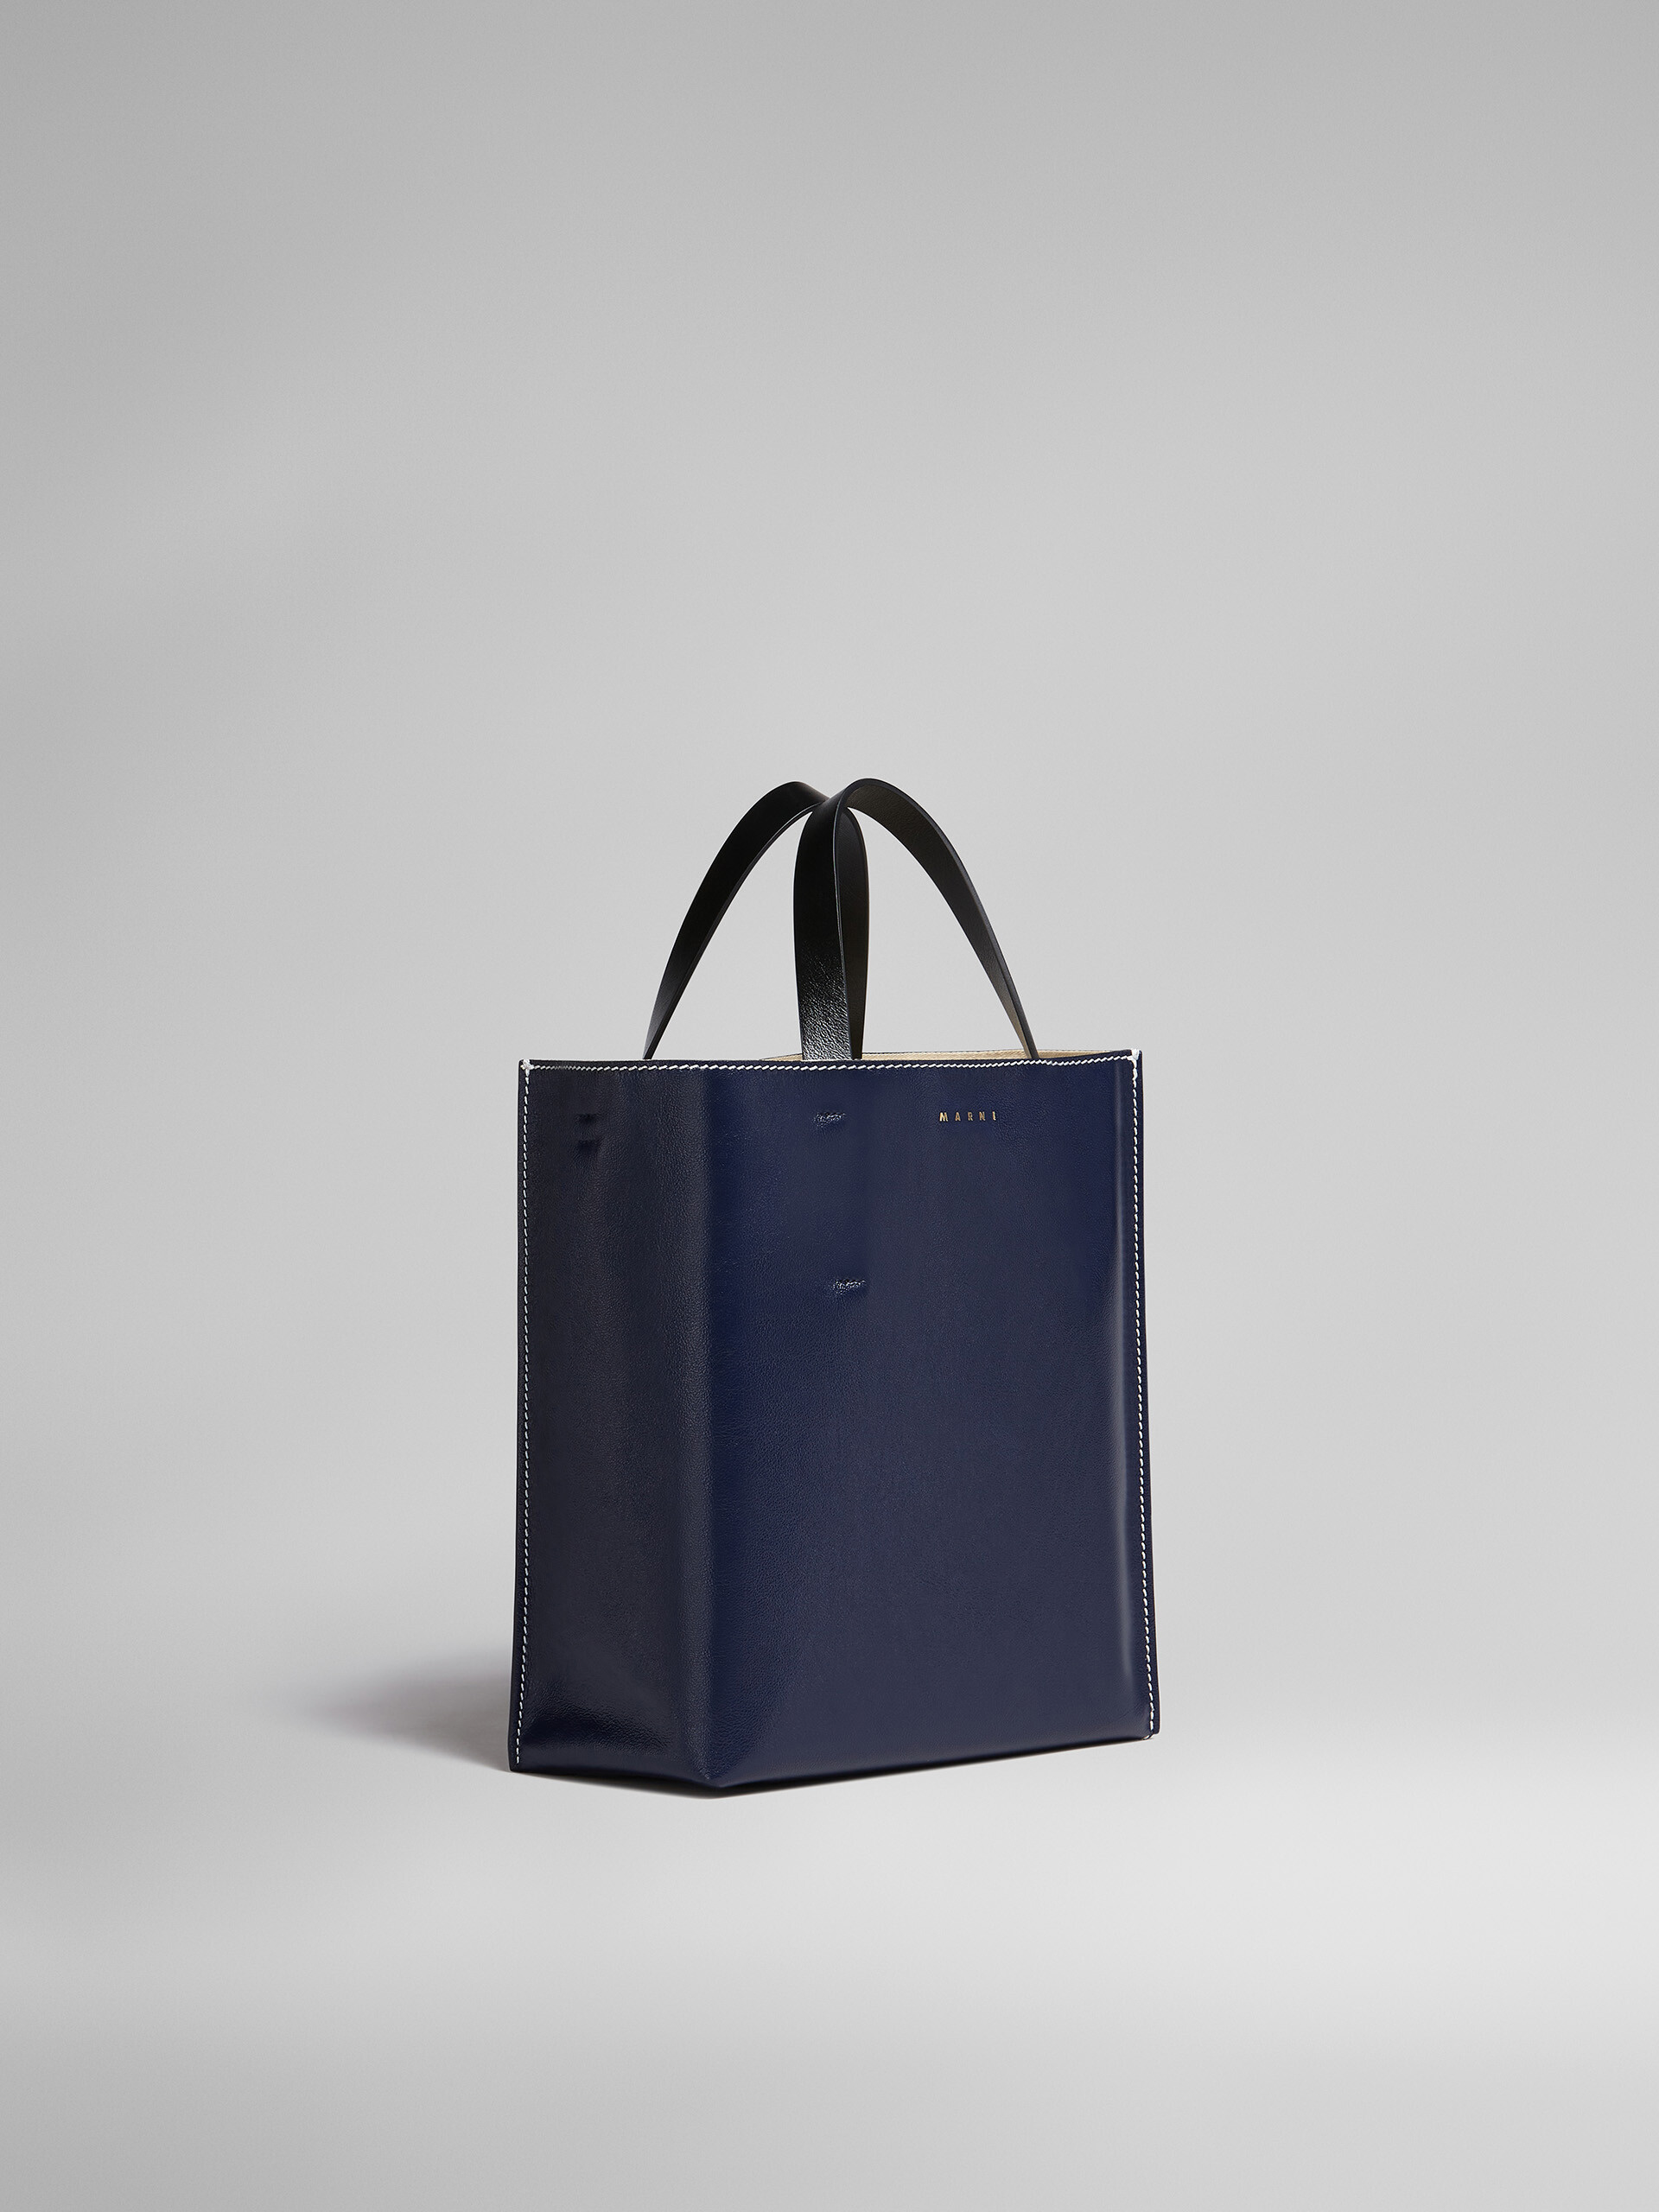 MUSEO SOFT small bag in blue and grey leather - Shopping Bags - Image 6